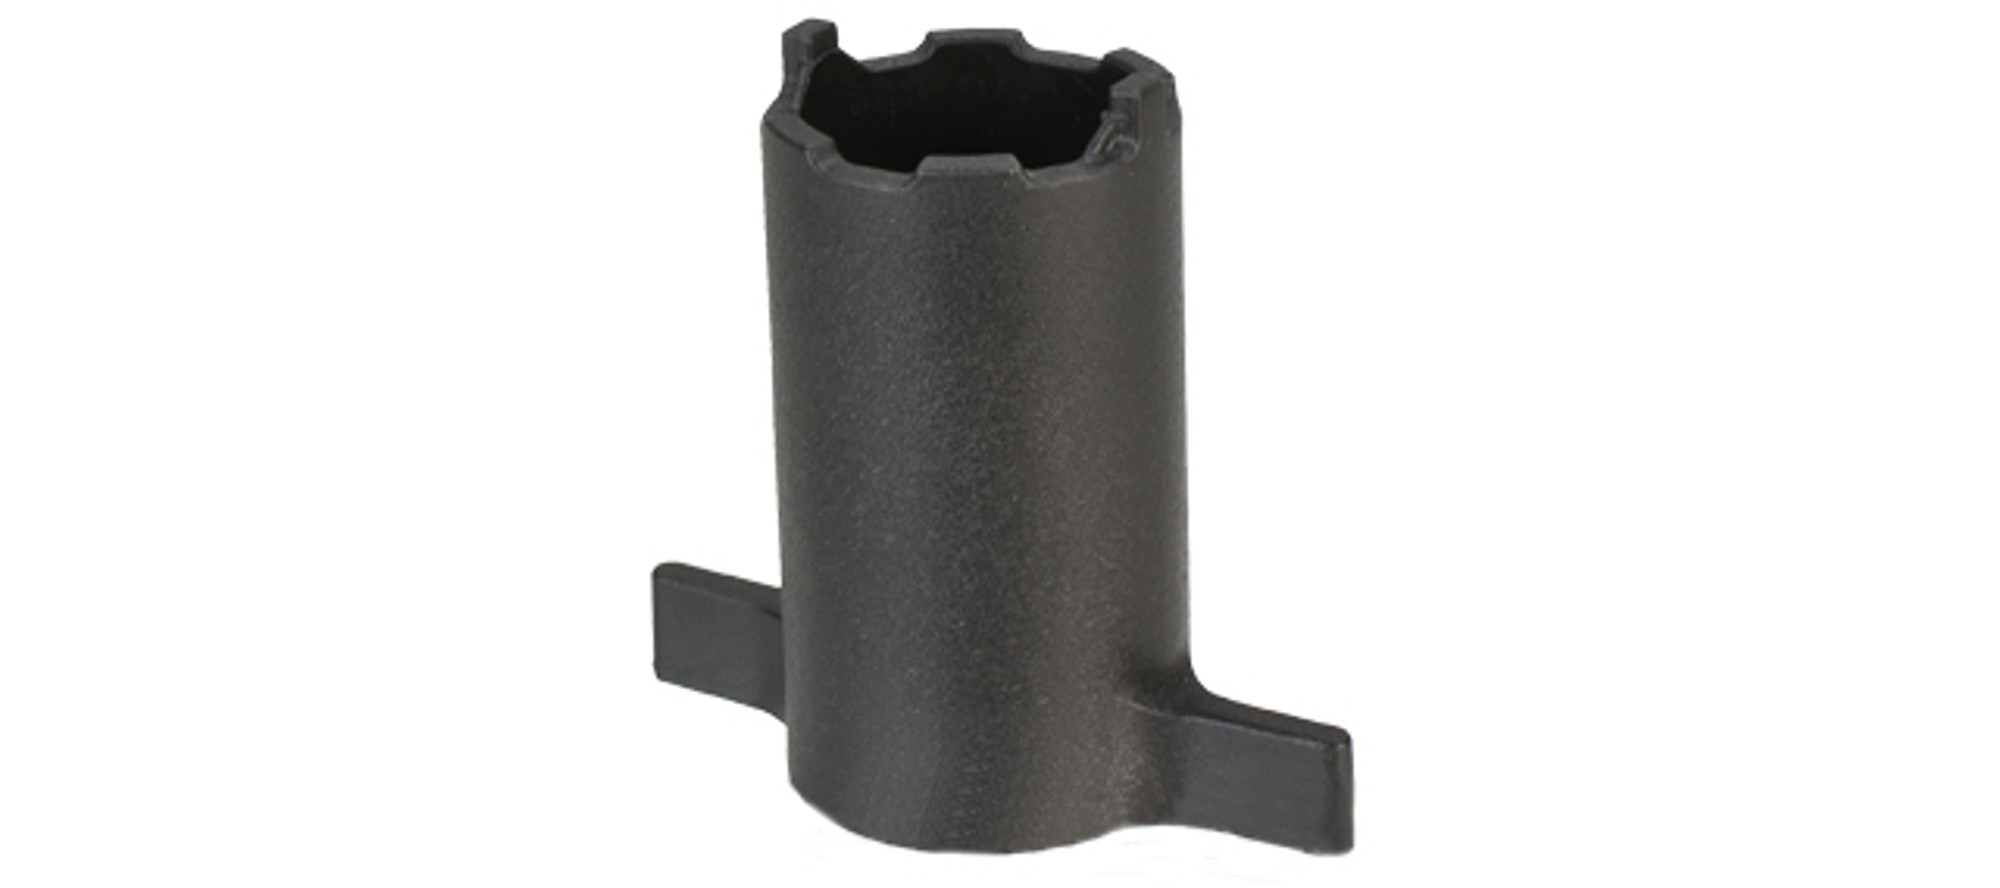 APS Co2 Shotgun Fore End Removal Tool for CAM870 Shell Ejecting Airsoft Shotguns